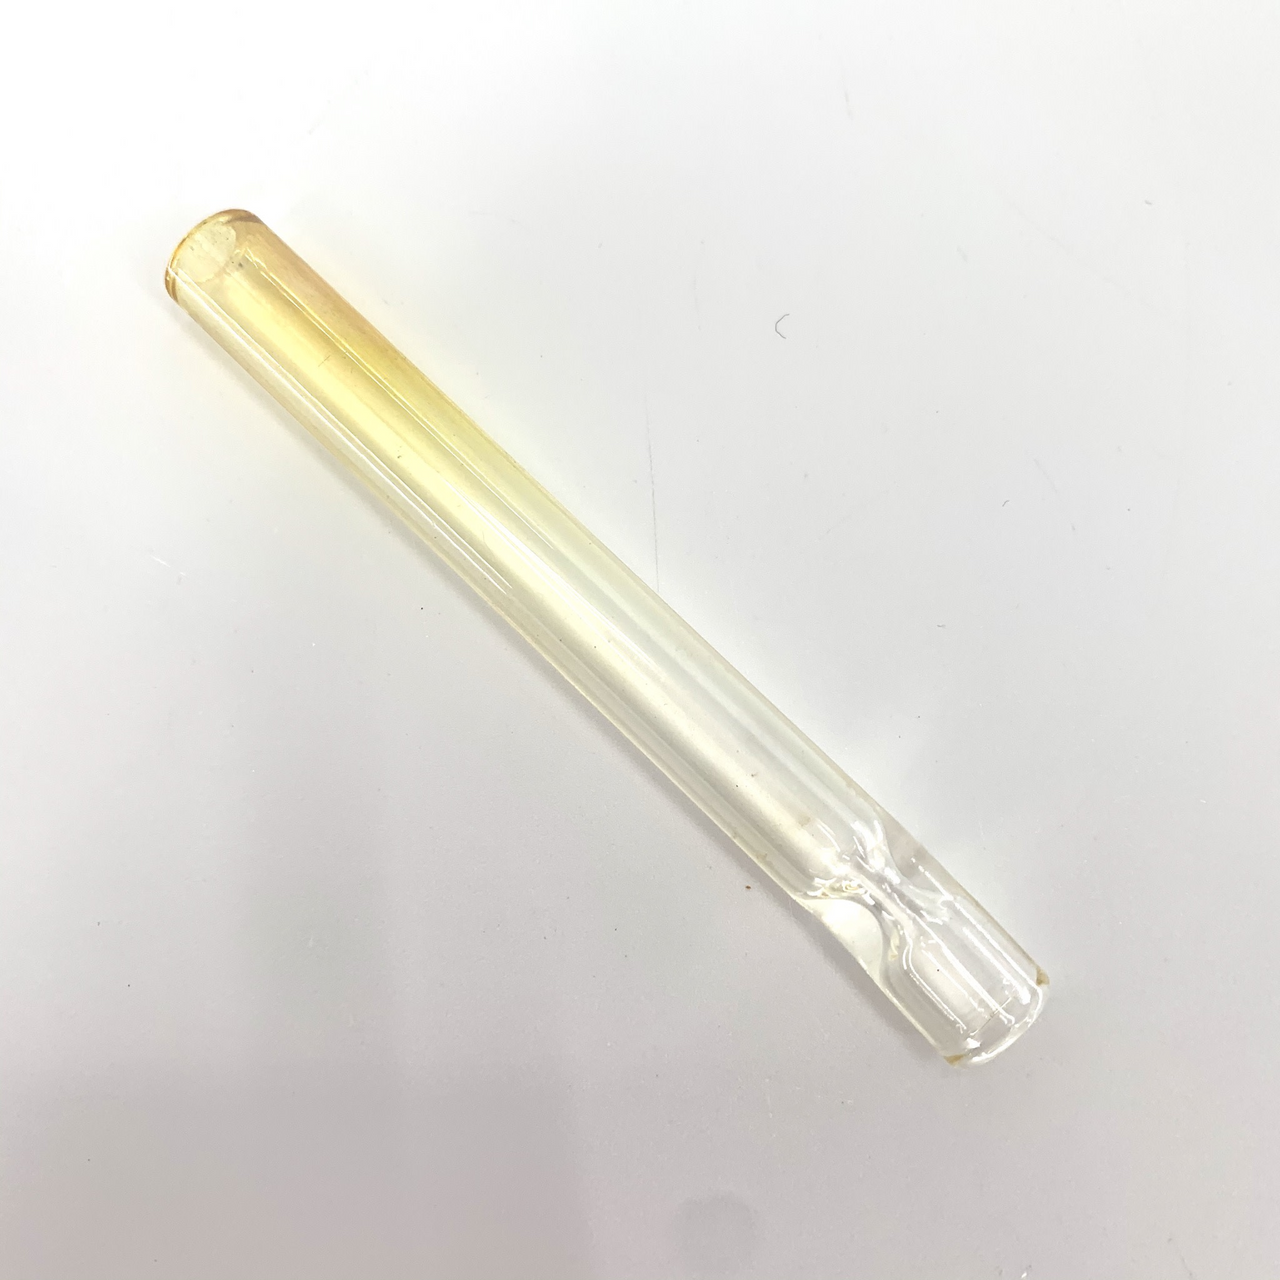 Fumed Glass One Hitter Pipe (3.25")